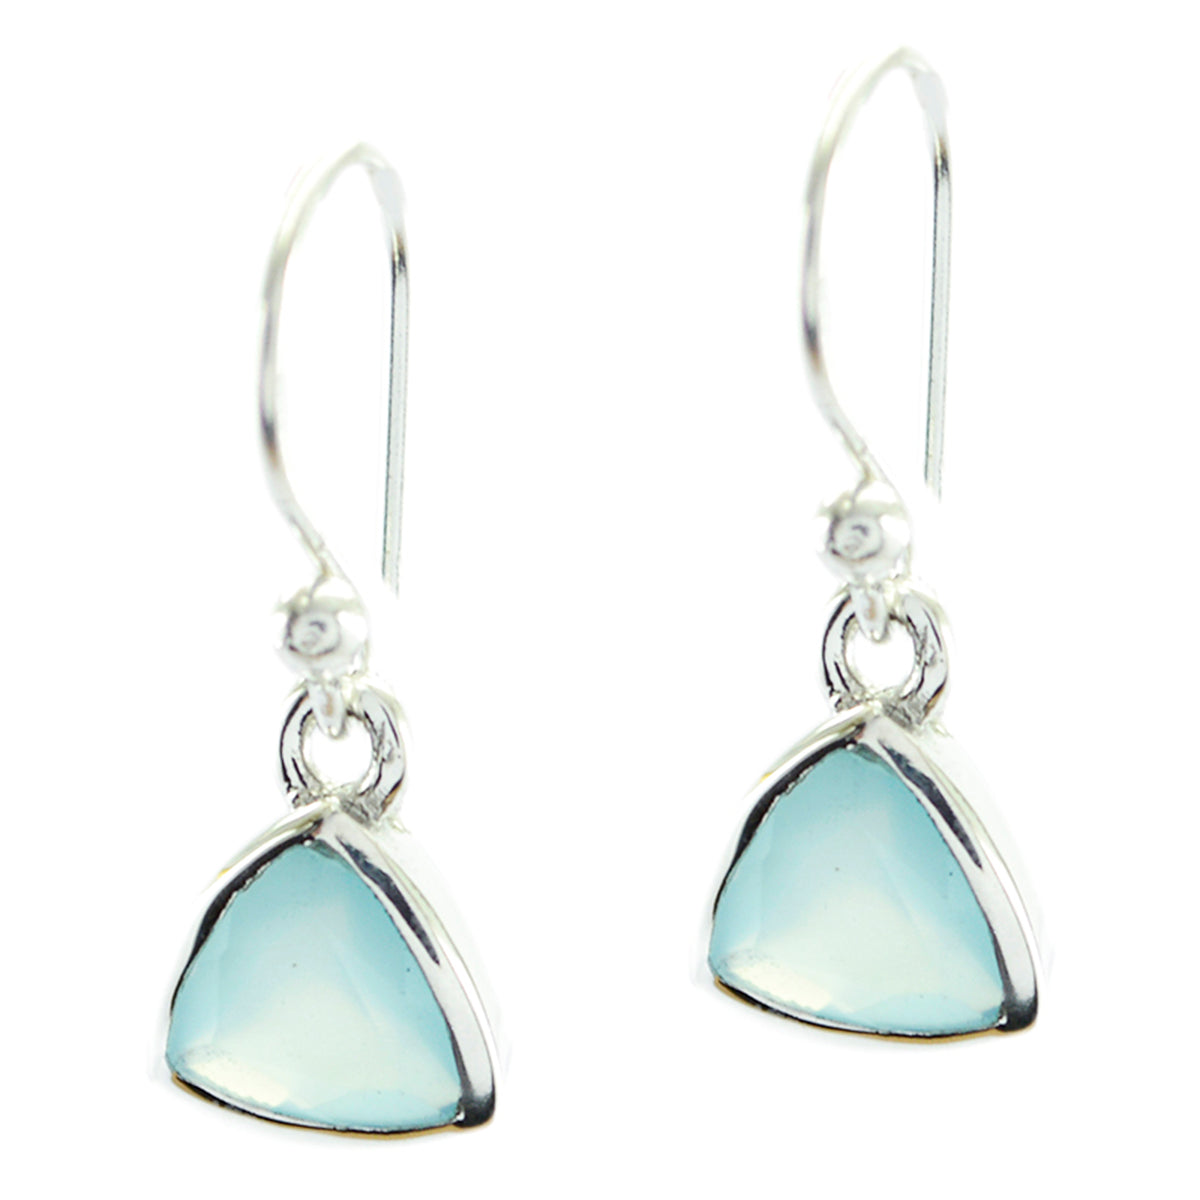 Riyo Genuine Gems trillion Faceted Aqua Chalcedoy Silver Earring gift for valentine's day